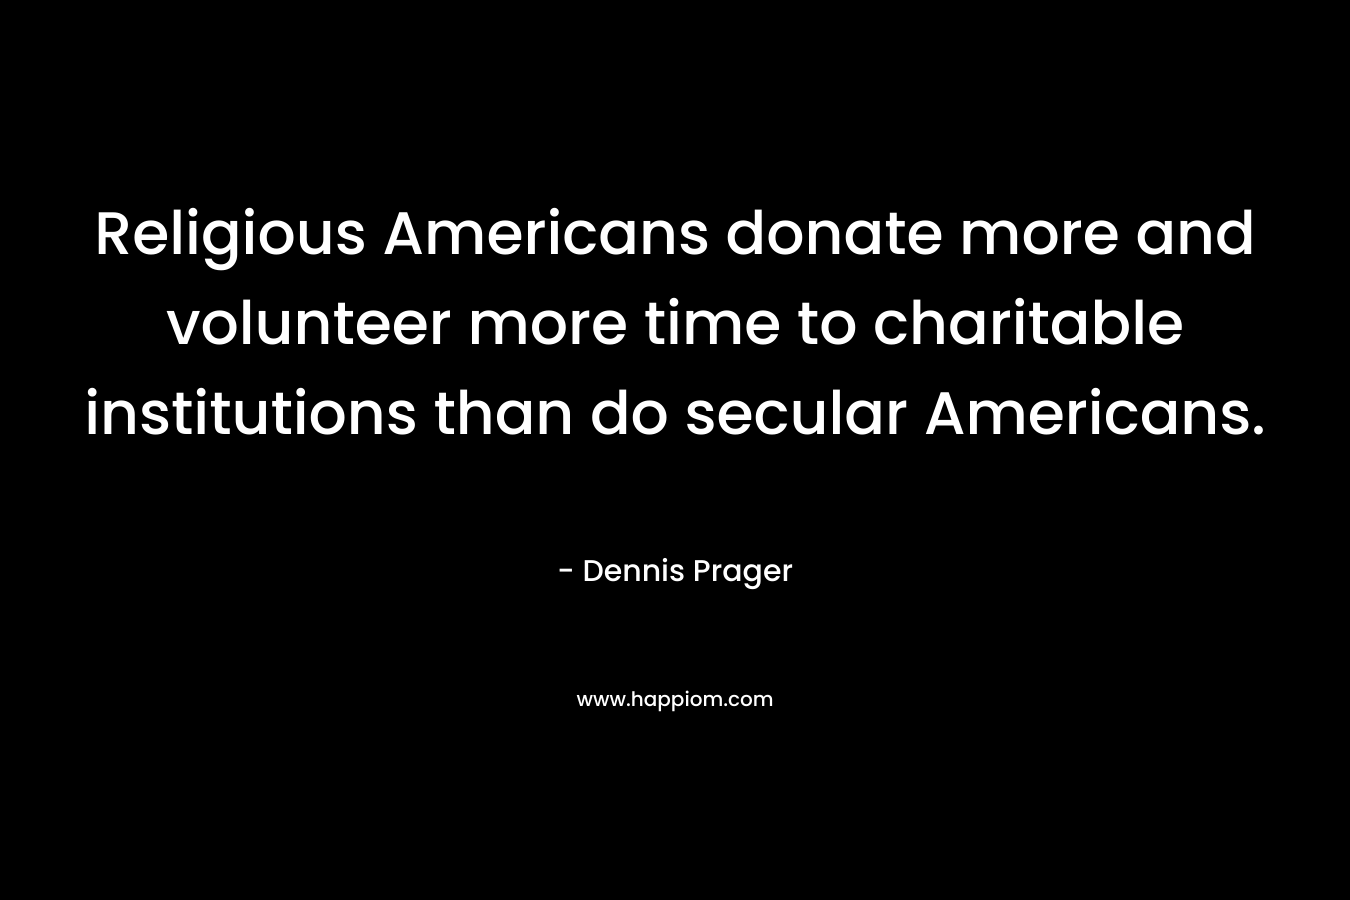 Religious Americans donate more and volunteer more time to charitable institutions than do secular Americans.